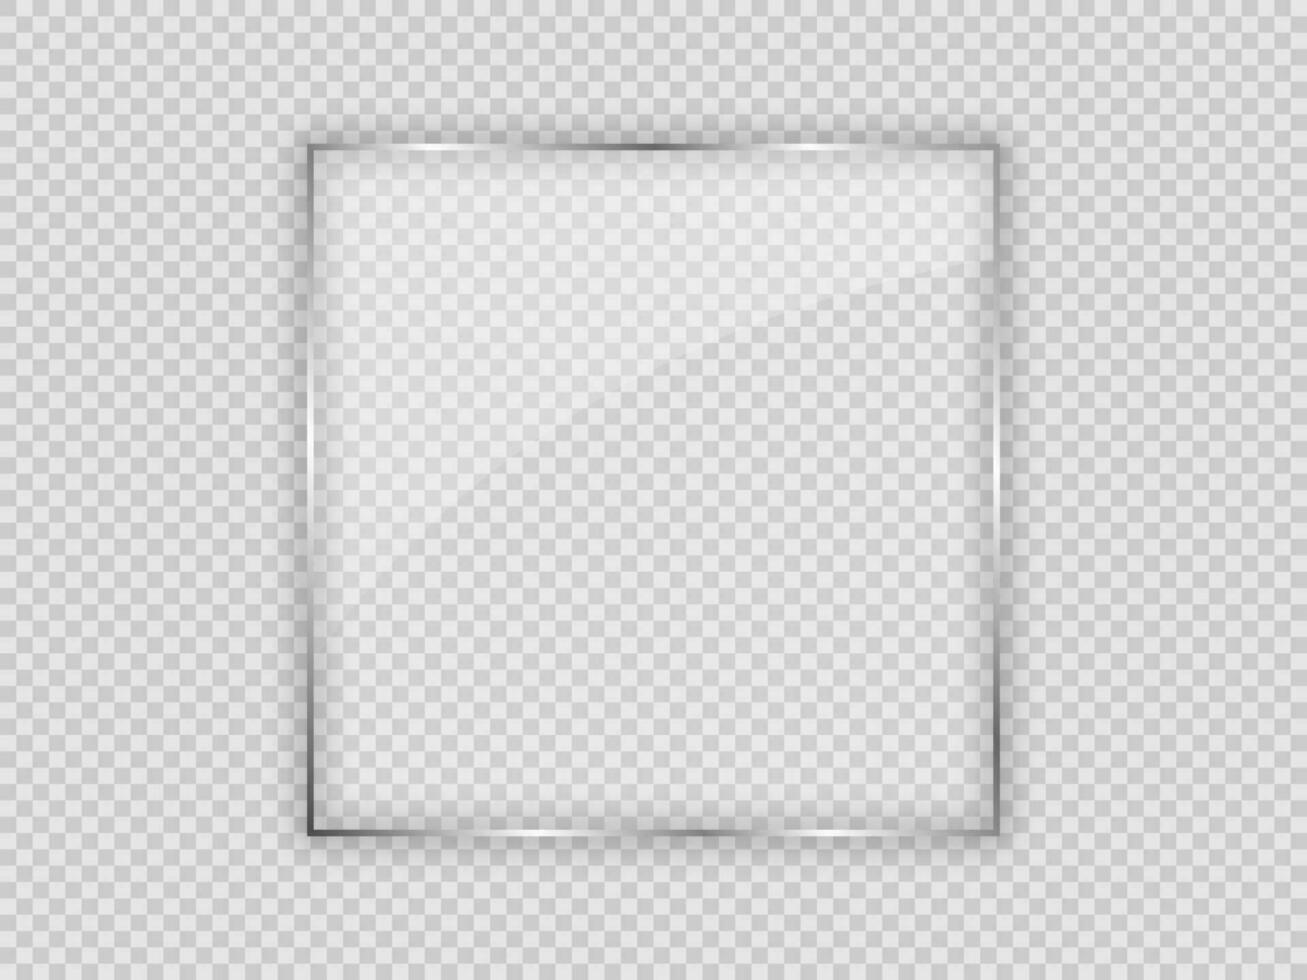 Glass plate in square frame vector